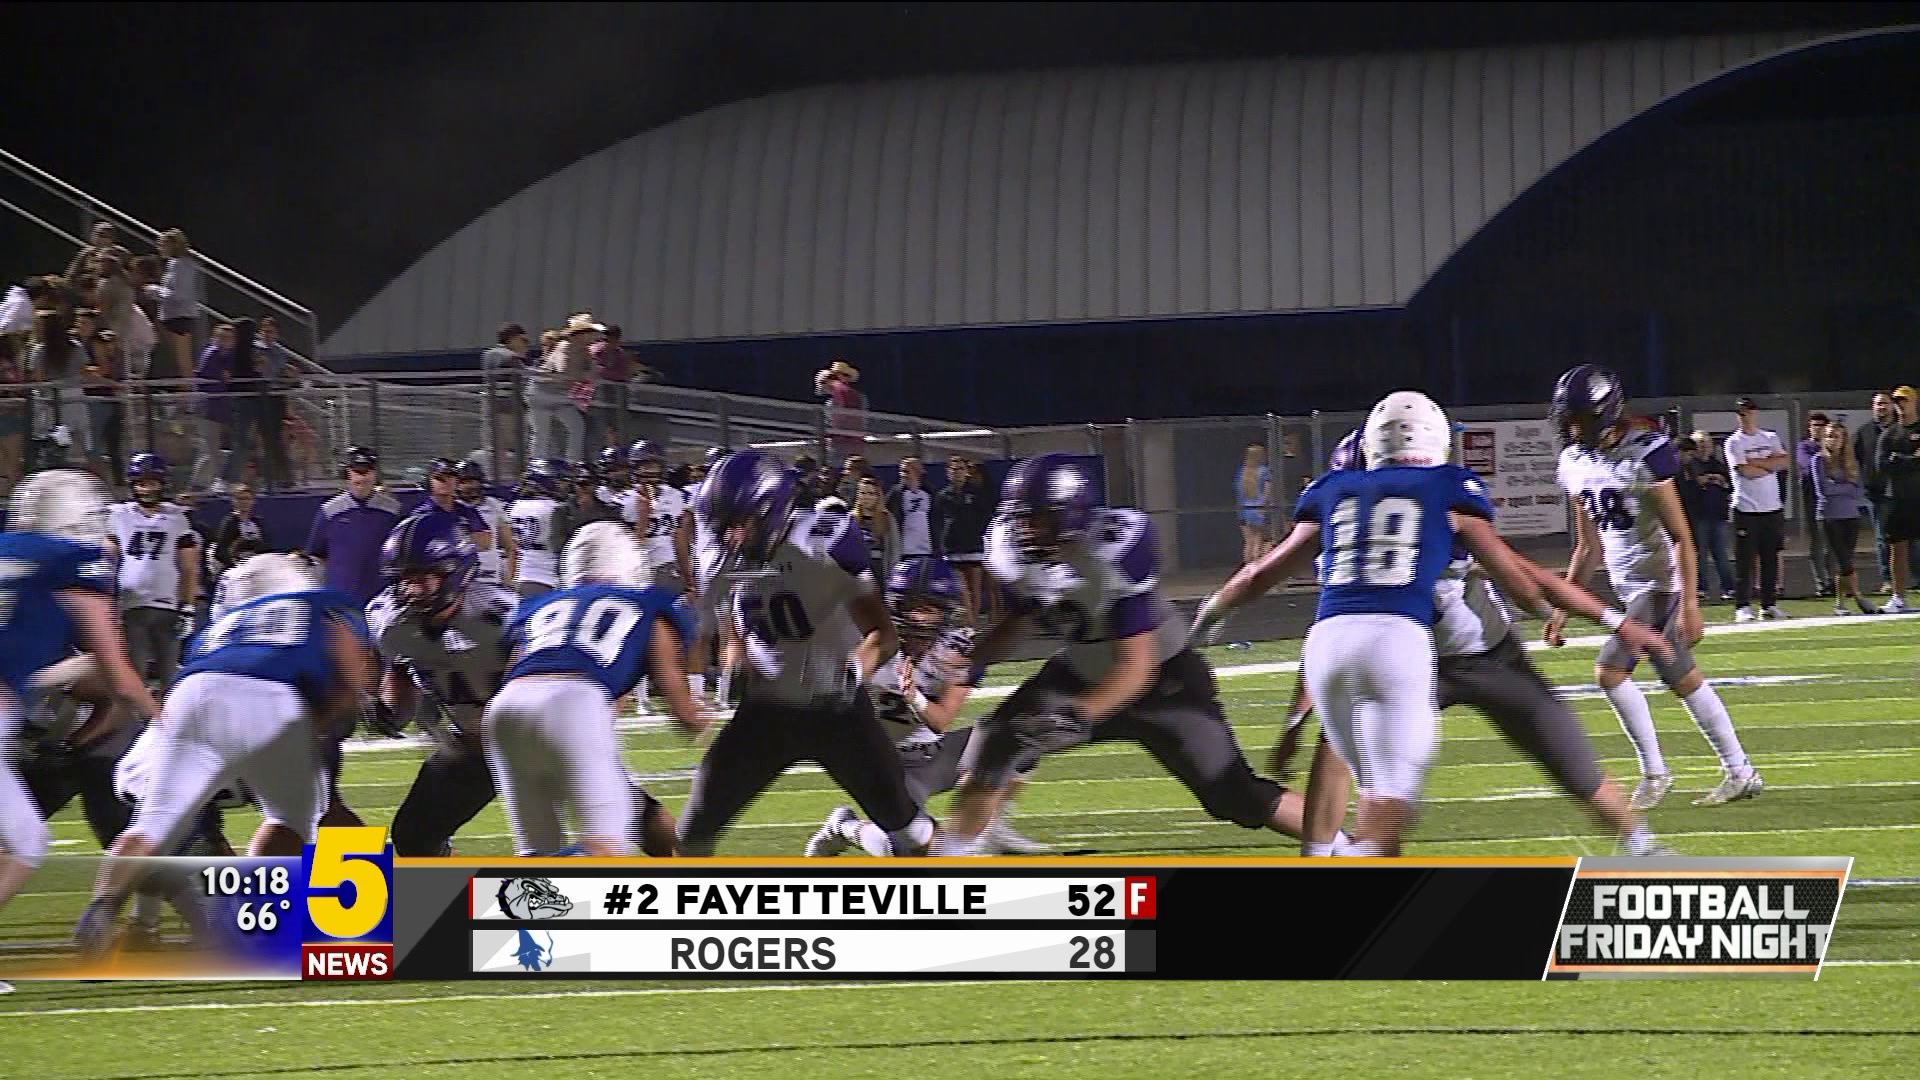 Fayetteville at Rogers